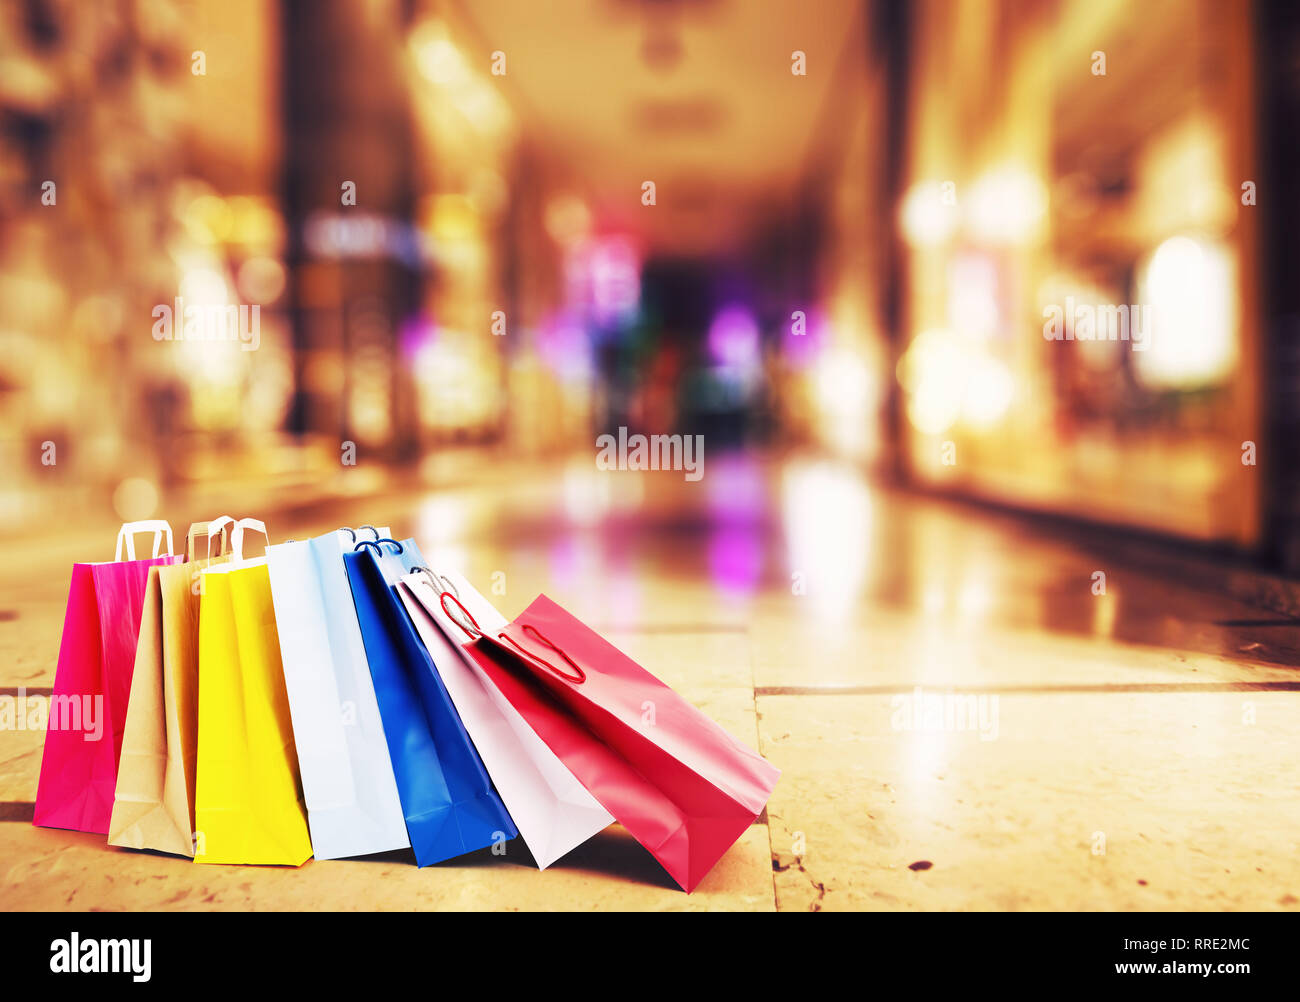 Colorful shopping bags on the ground with a gallery of luxurious shops in the background Stock Photo